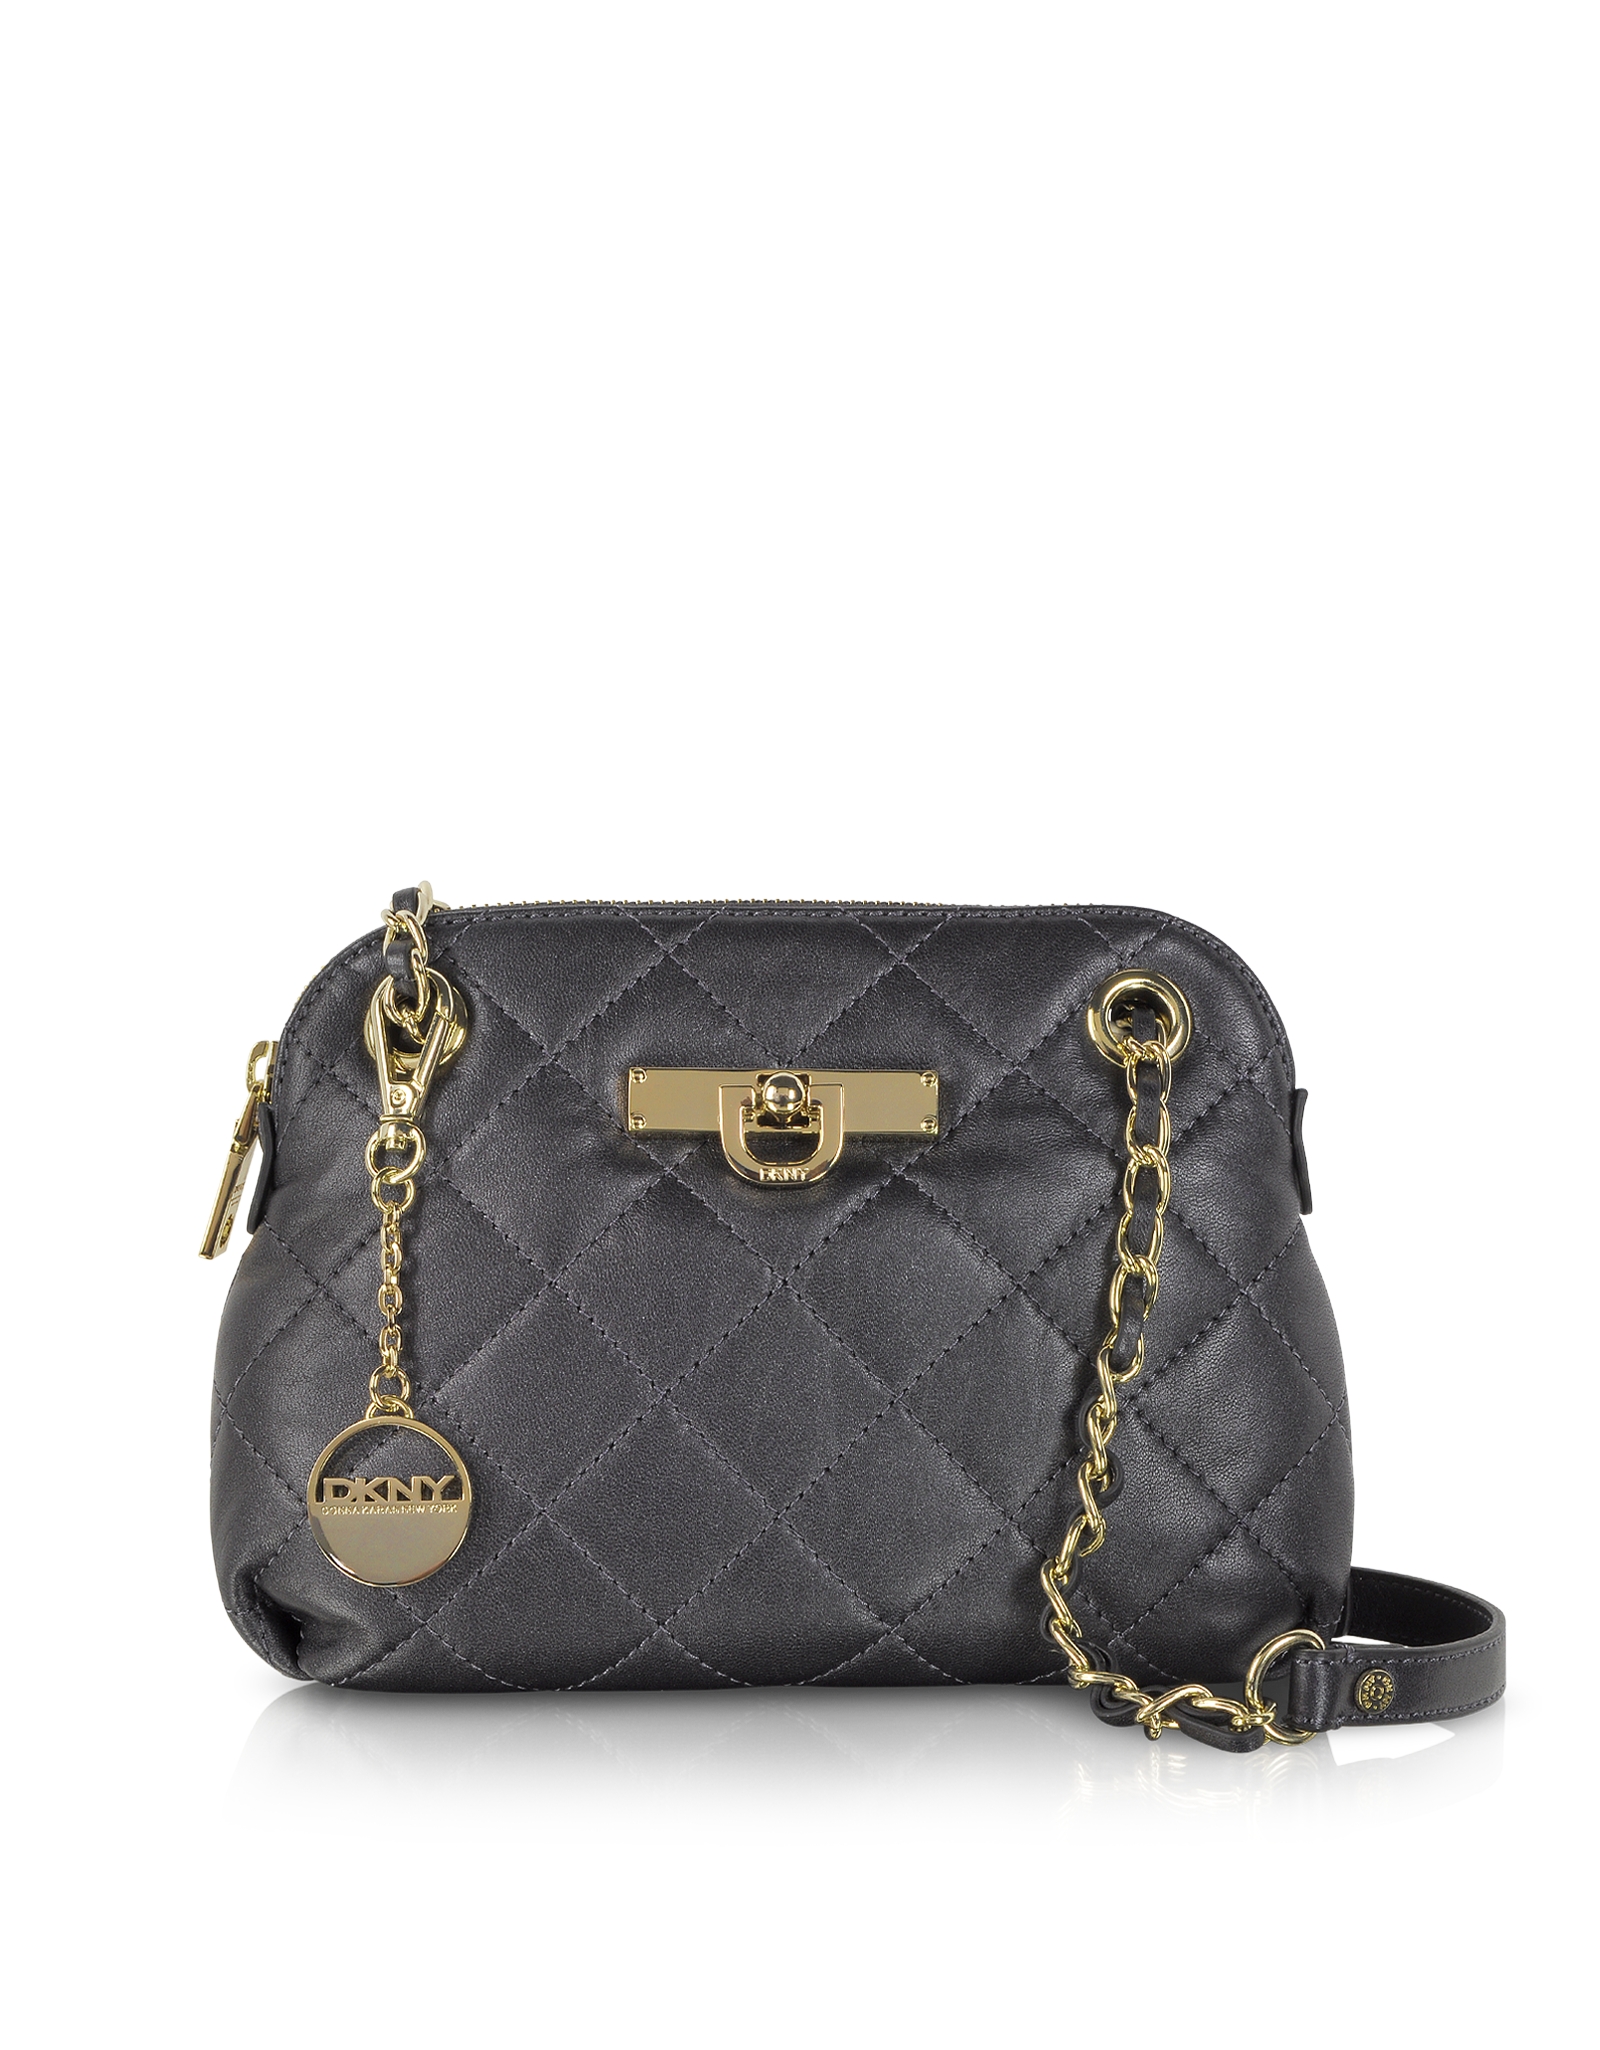 DKNY Small Round Quilted Leather Crossbody Bag in Black - Lyst